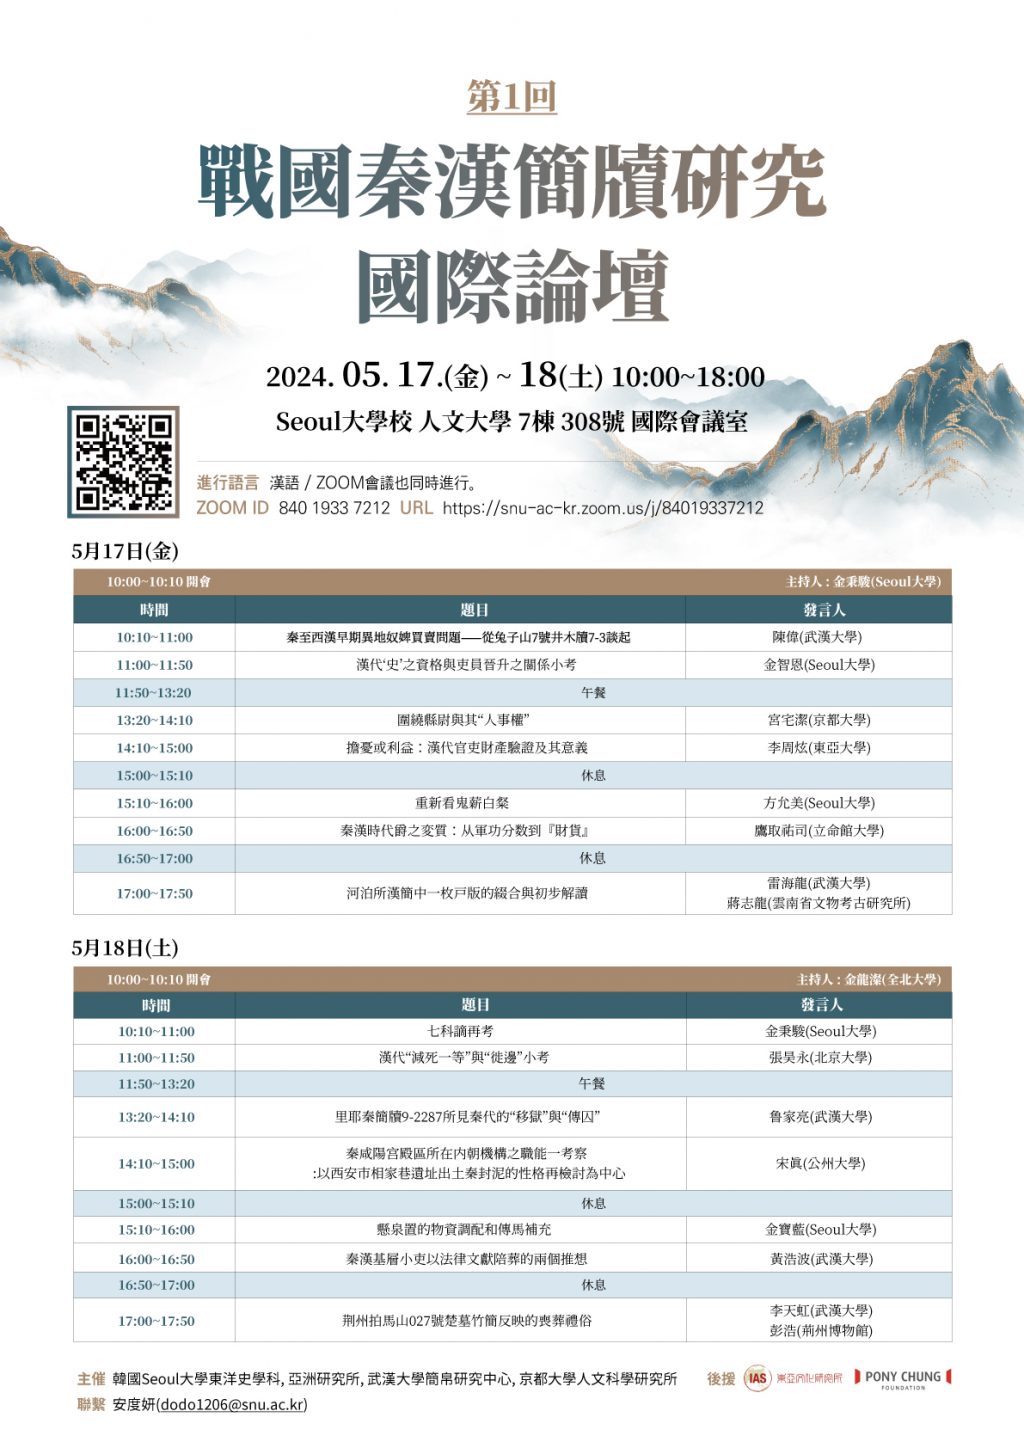 The 1st International Conference on Warring States and Qin and Han Papers